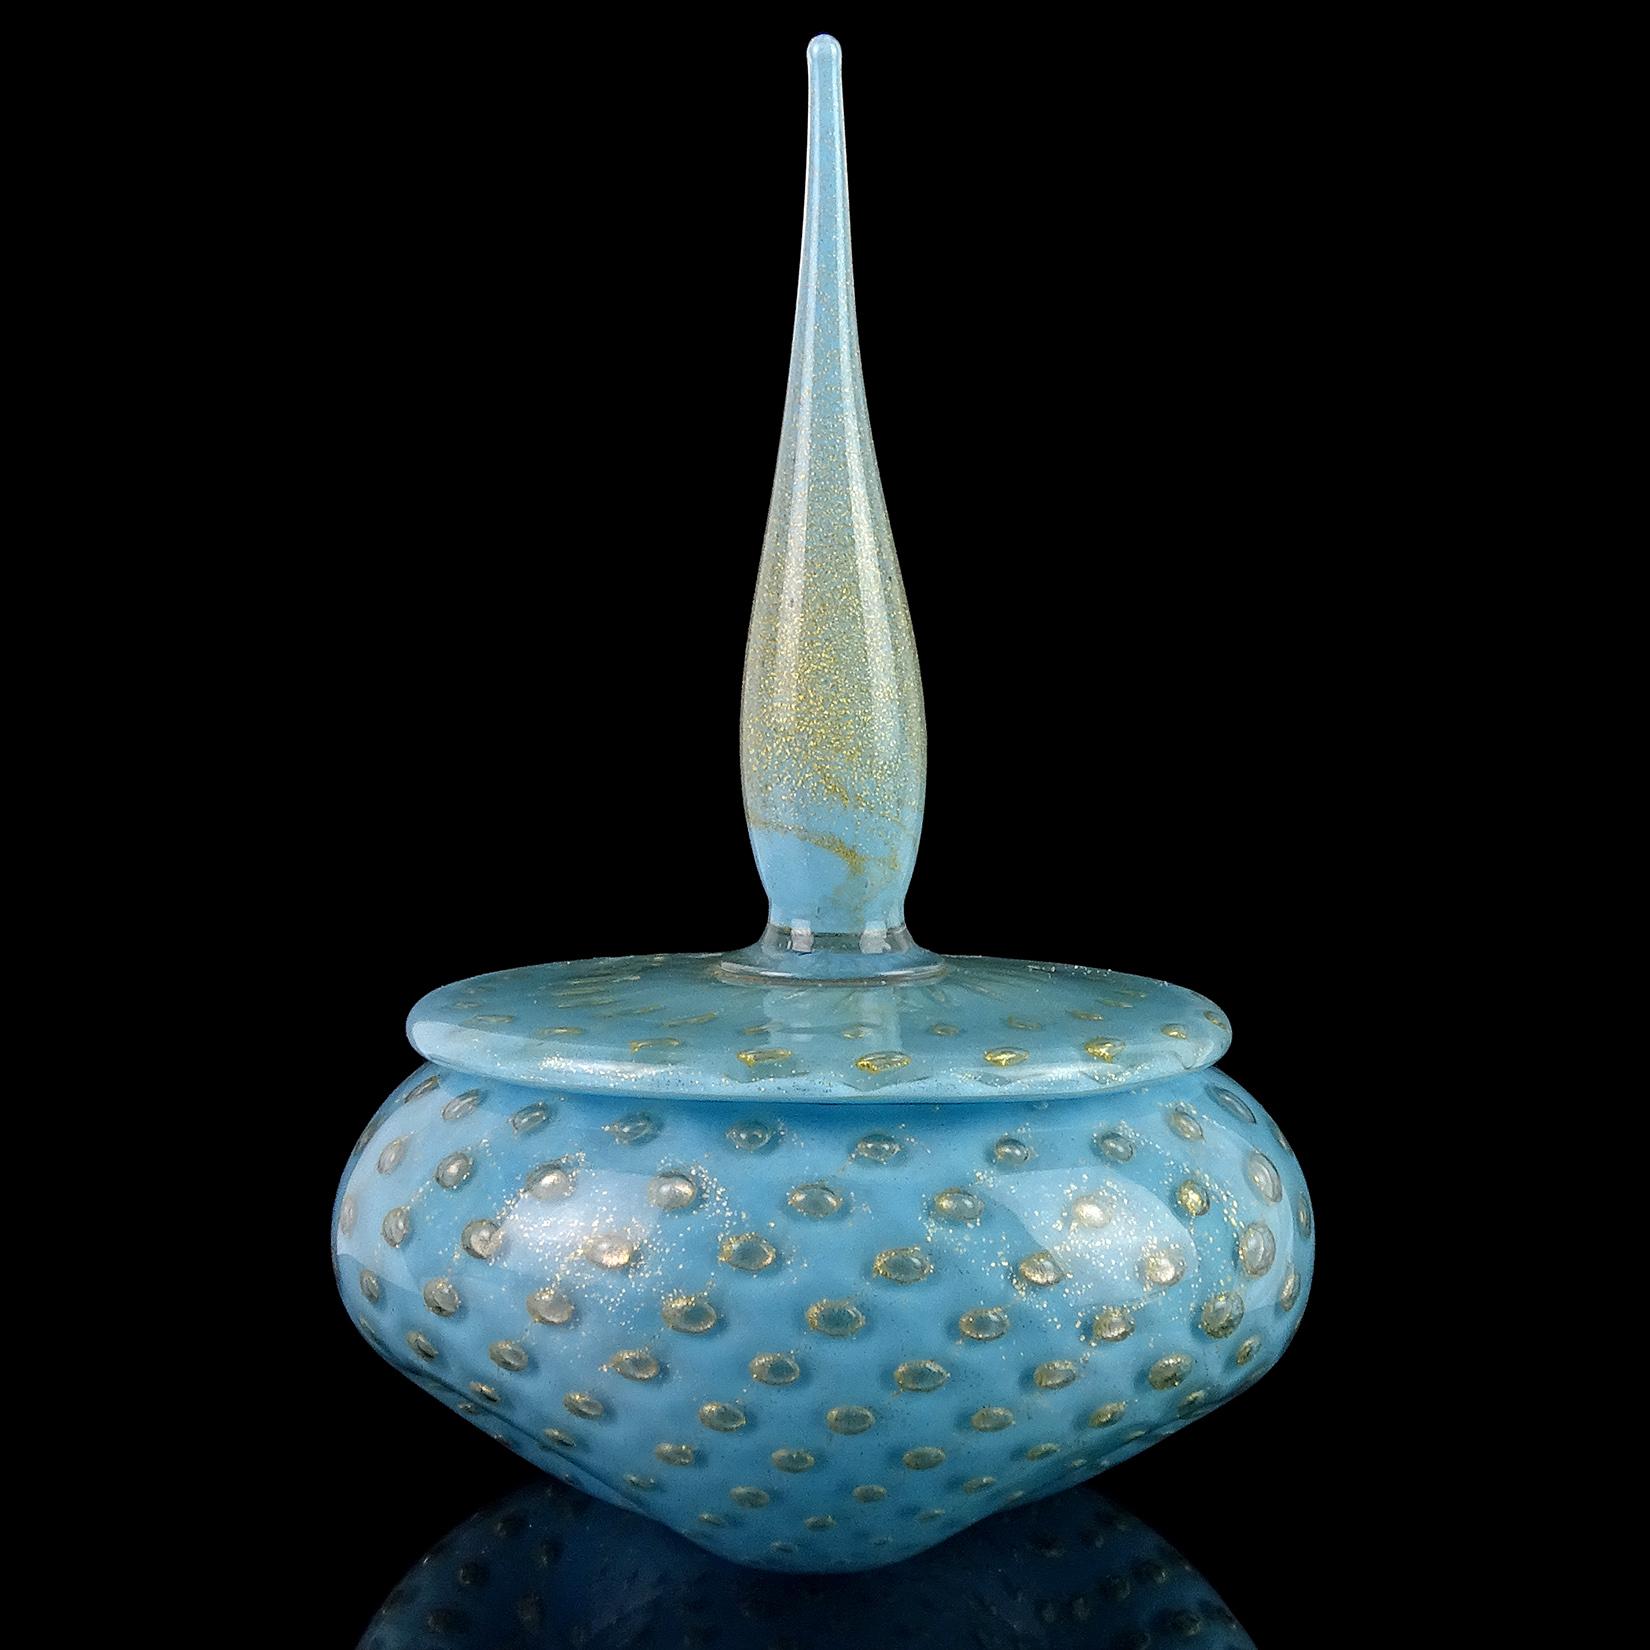 Gorgeous vintage Murano hand blown blue, controlled bubbles and gold flecks art glass powder or jewelry box. Documented to designer Alfredo Barbini, circa 1950s. The piece has three cute dimples on the body, with a spike top decoration. The gold